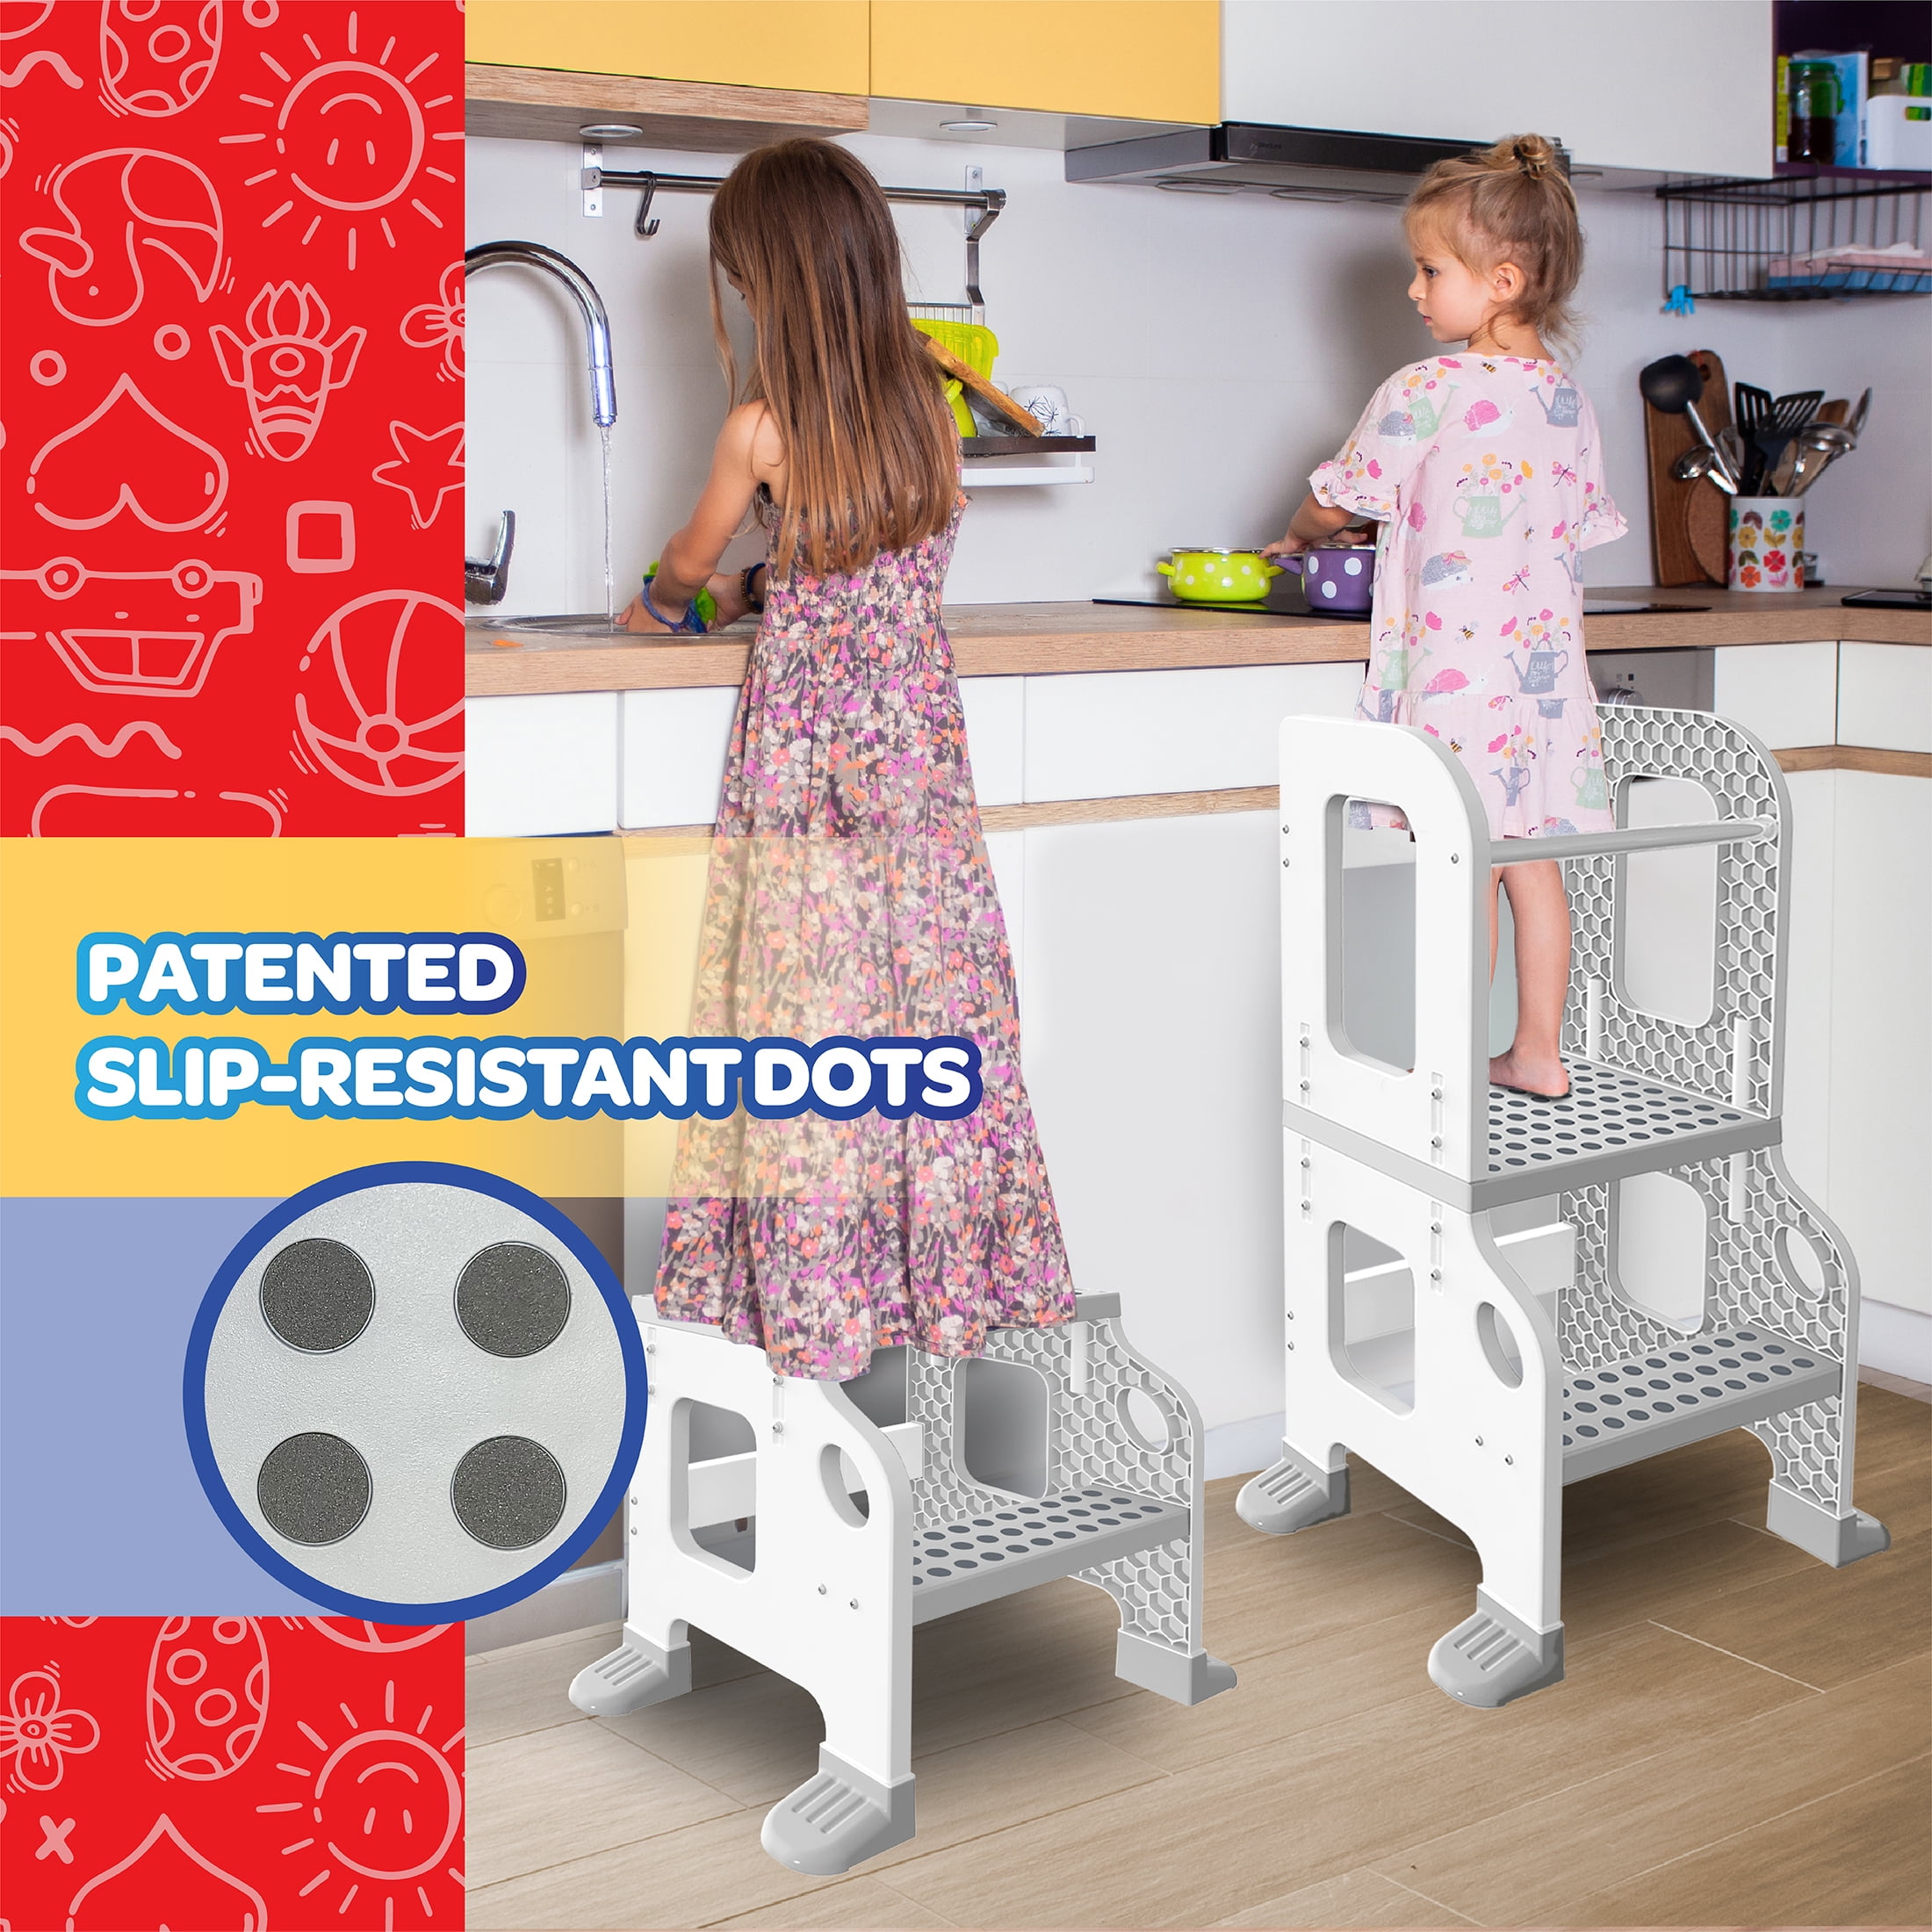 Kitchen Buddy 2-in-1 Kids Helper Stool Possibly Only $26 at Walmart  (Regularly $40)